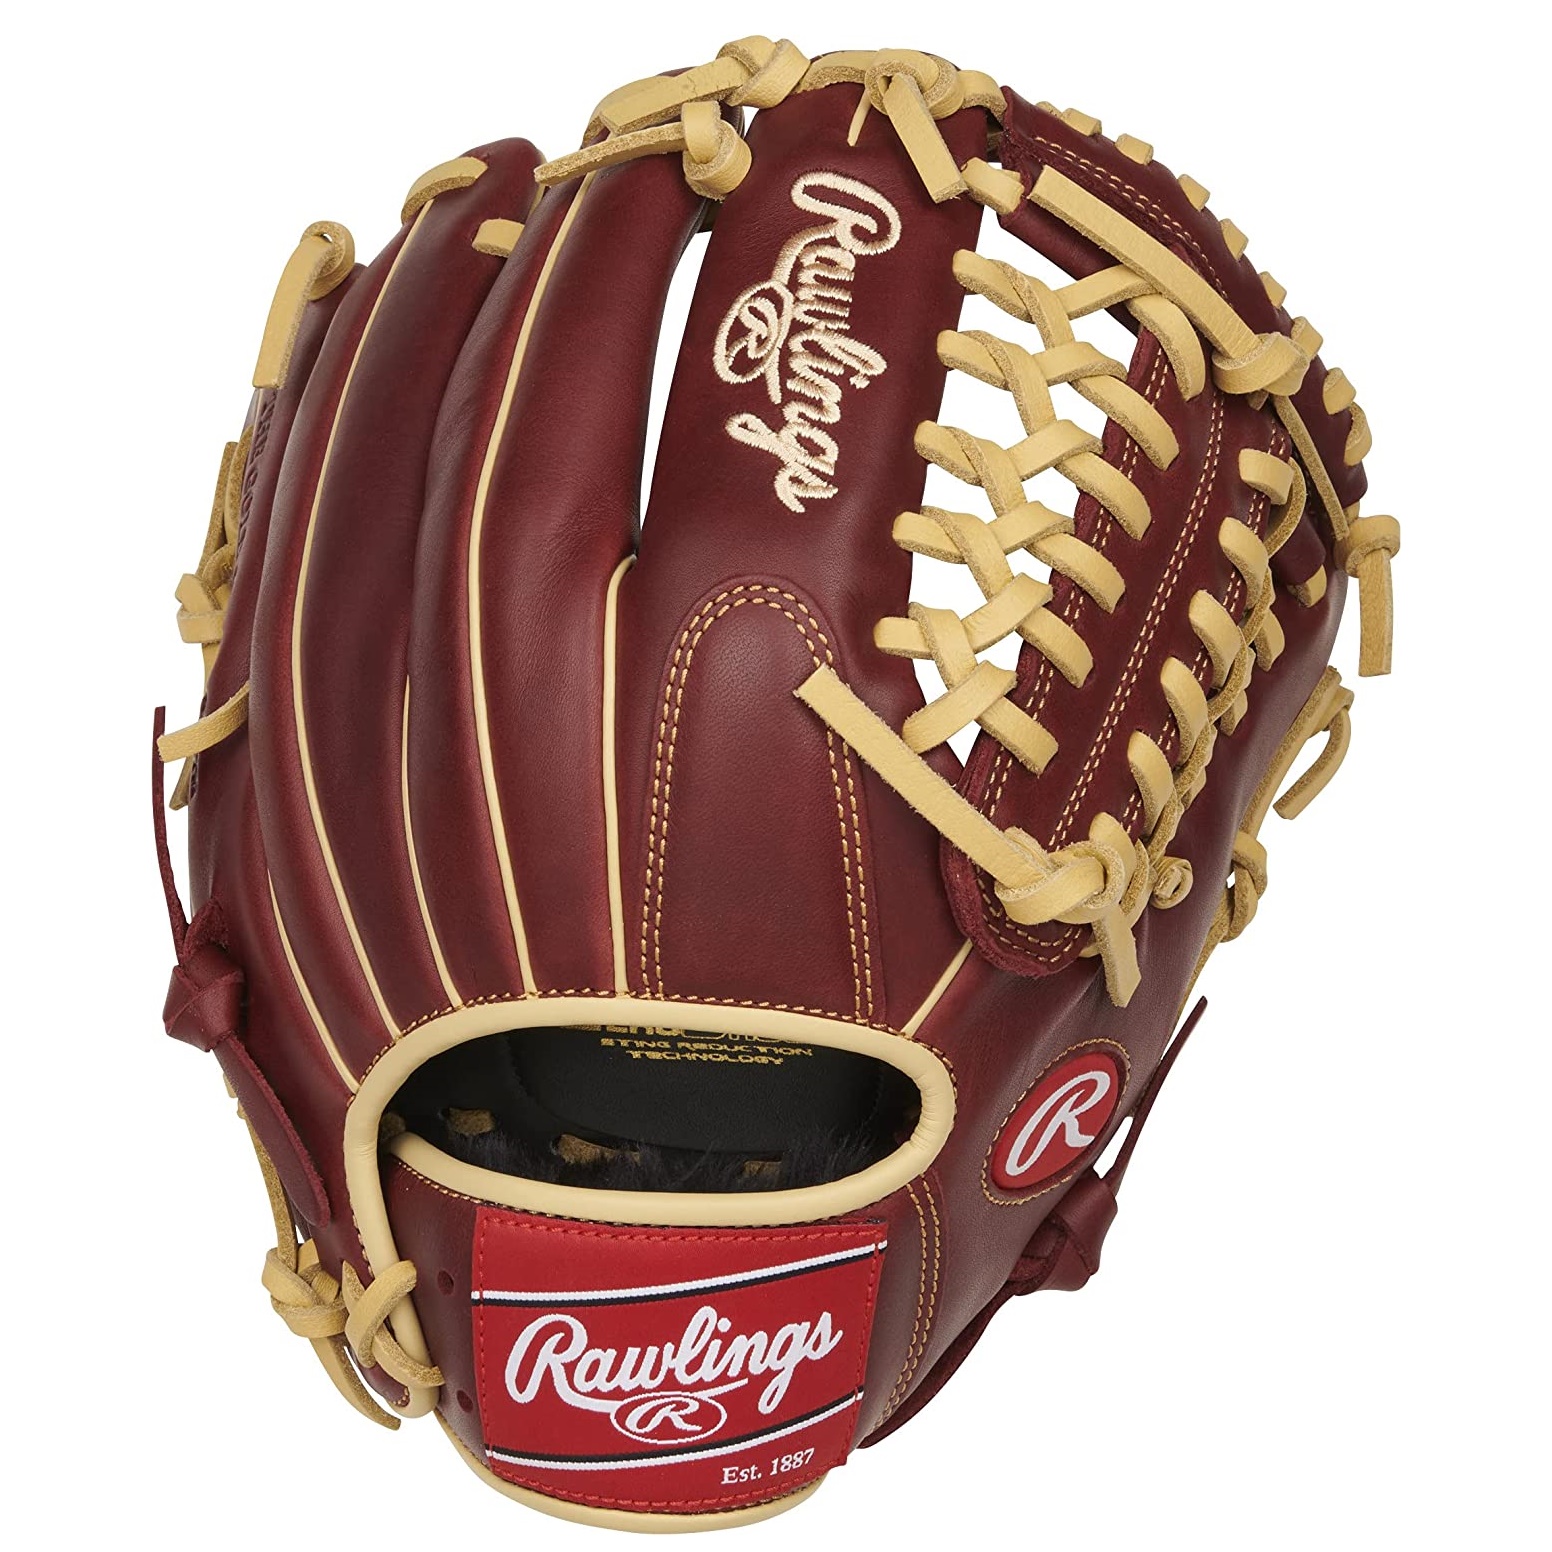 The Rawlings Sandlot 11.5 Modified Trap Web baseball glove is a standout model in the Sandlot Series, known for its classic vintage appearance and exceptional performance. Crafted with oiled pull-up leather, this glove showcases a unique look and feel that harkens back to the golden age of baseball. The oiled leather also minimizes break-in time, allowing players to quickly achieve optimal performance on the field. Featuring an 11.5-inch model, this glove strikes a balance between size and maneuverability. The Modified Trap Web design adds versatility and functionality, offering excellent ball retention and control. With this web pattern, players can confidently secure the ball and make quick, precise transfers. The conventional open back design of the Sandlot glove ensures enhanced breathability and flexibility, allowing air to circulate and keeping the player's hand cool and comfortable during intense gameplay. Durability is a key attribute of the Rawlings Sandlot 11.5 Modified Trap Web glove. It is constructed with full-grain oiled shell leather, which ensures long-lasting performance, even in demanding playing conditions. This premium leather provides exceptional resistance to wear and tear, maintaining the glove's integrity over time. Player protection is prioritized with the inclusion of the Zero Shock Palm. This feature provides an extra layer of cushioning to absorb impact and reduce sting when catching hard-hit balls. It offers peace of mind and enhances comfort, allowing players to focus on their performance without worrying about discomfort or potential injuries. The Sandlot 11.5 Modified Trap Web glove also boasts padded finger back linings, delivering unmatched comfort during extended periods of play. These linings minimize friction and irritation, providing a soft and cozy fit that players can rely on throughout the game. Designed with professional-grade standards in mind, this glove showcases professional web designs. The Modified Trap Web pattern, in particular, is favored by many players for its versatility and reliability in various fielding situations. It provides a deep pocket for secure catches and efficient ball transfer. The break-in process of the Sandlot 11.5 Modified Trap Web glove is optimized for convenience. It comes factory broken in to approximately 80%, meaning it is ready for use straight out of the box. The remaining 20% of the break-in process can be customized by the player, allowing them to shape and mold the glove to their specific preferences.